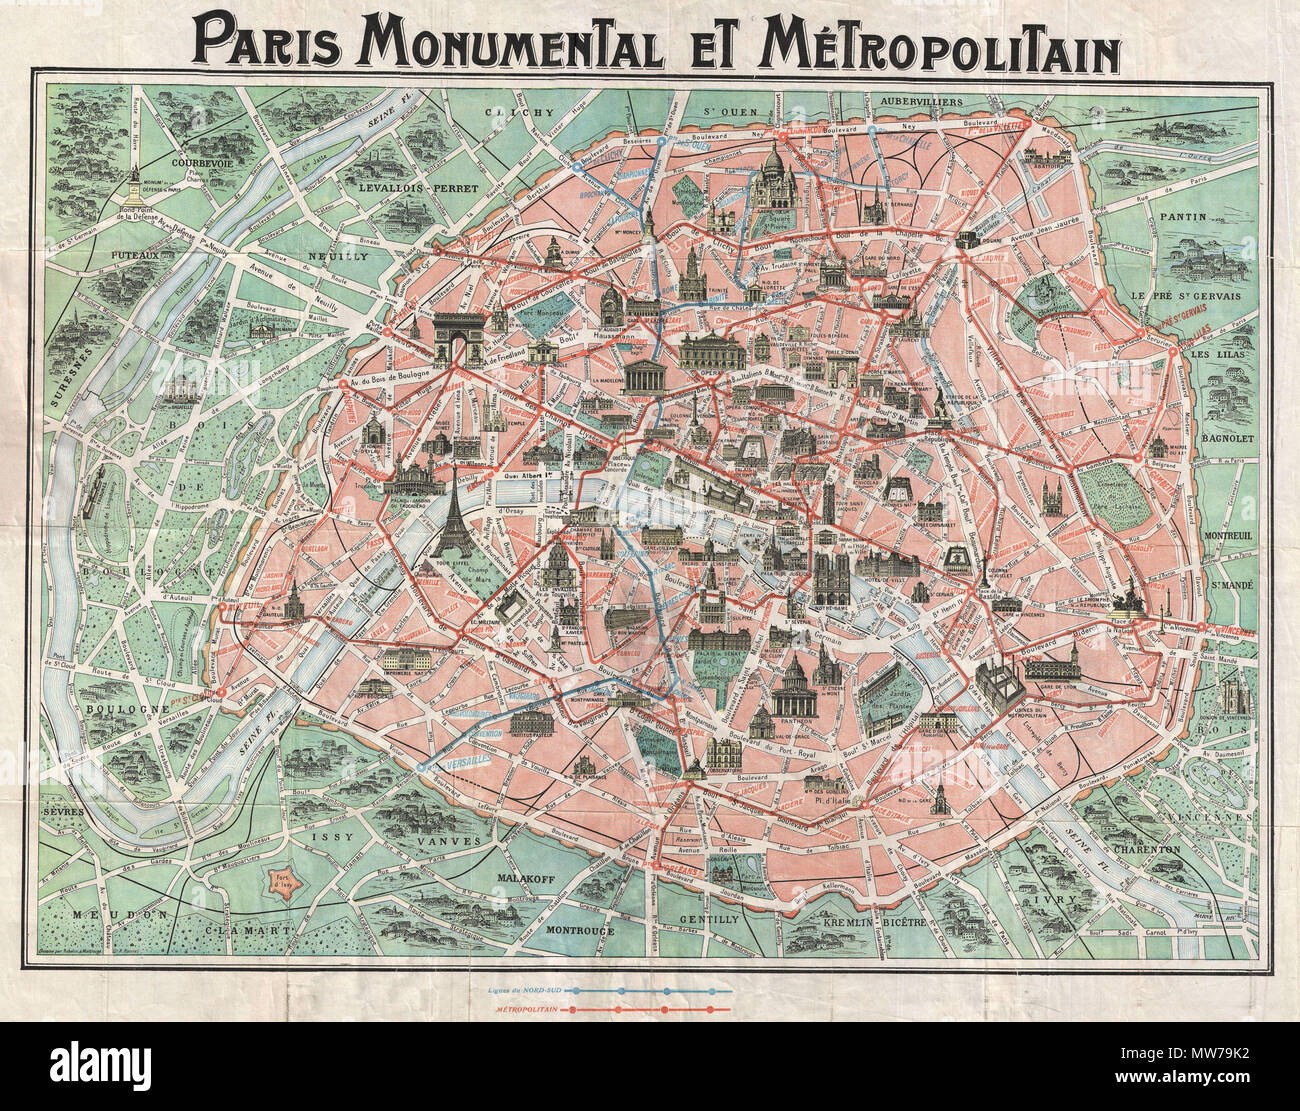 paris-monumental-et-metropolitain-english-this-is-an-extremely